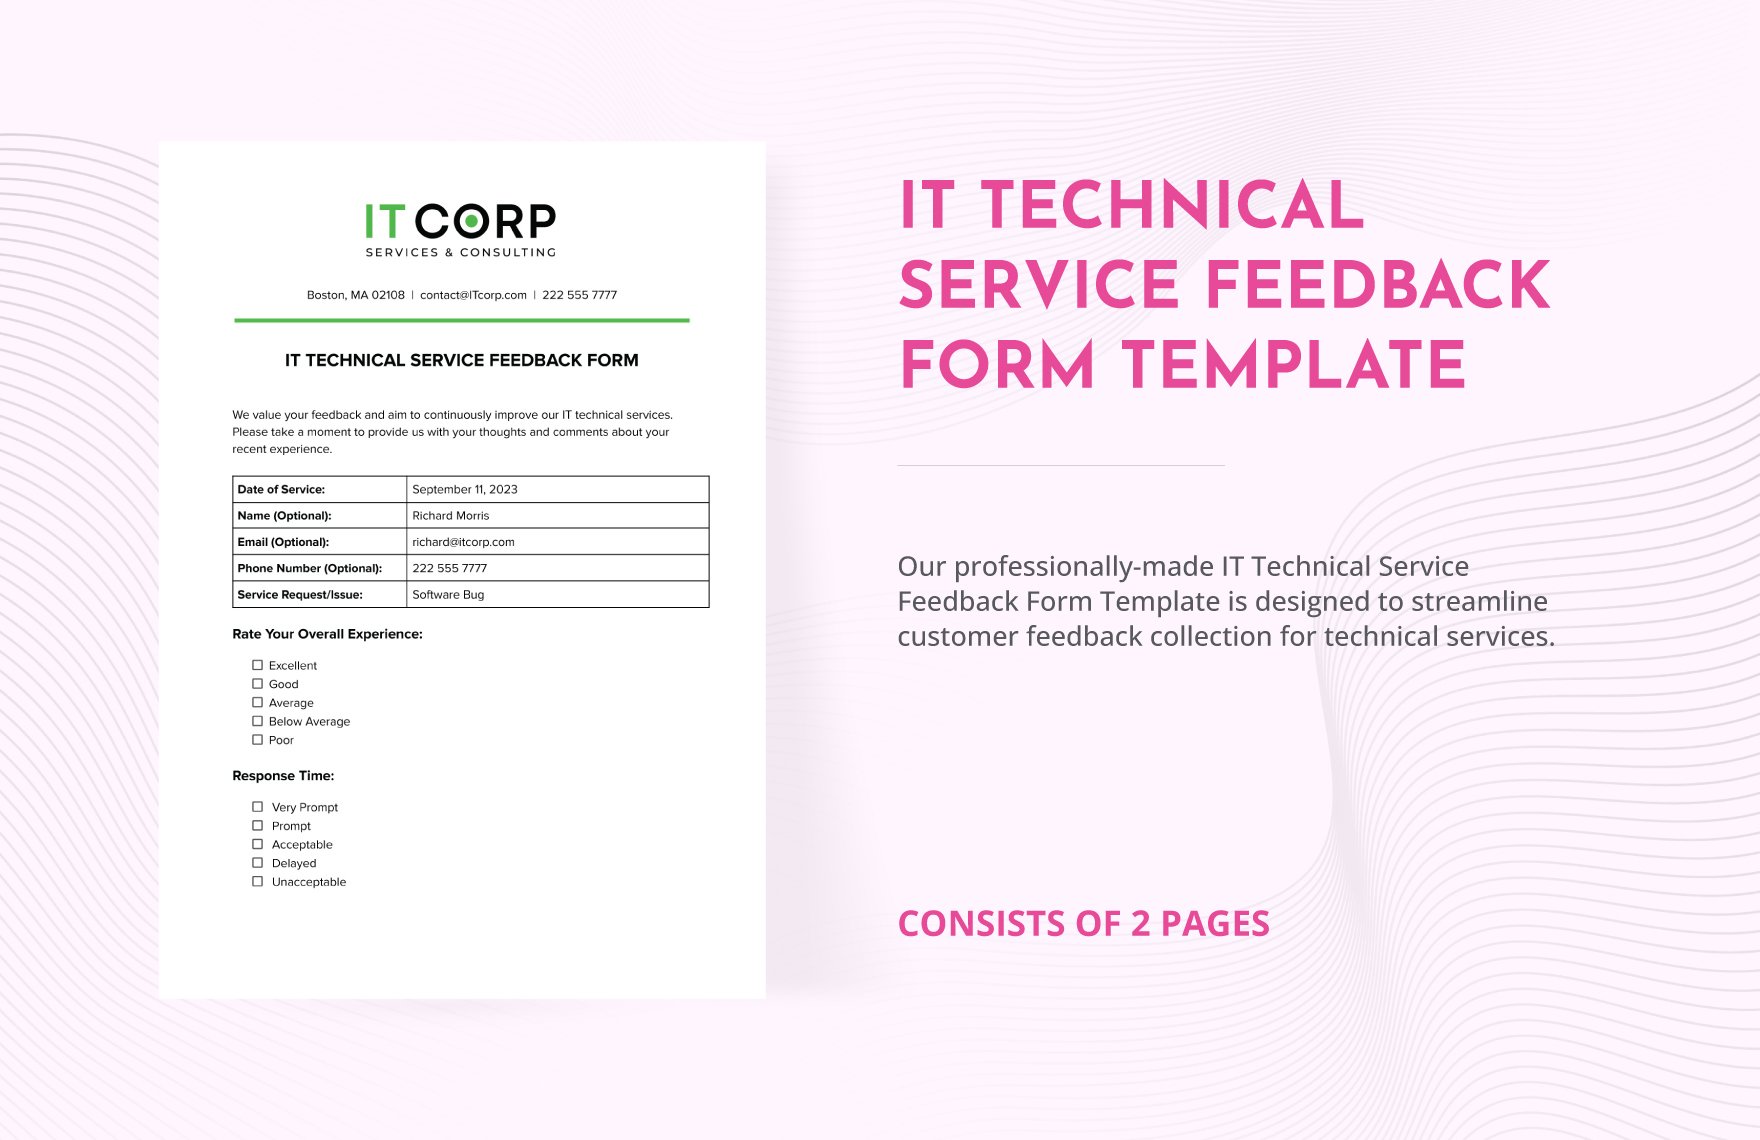 IT Technical Service Feedback Form Template